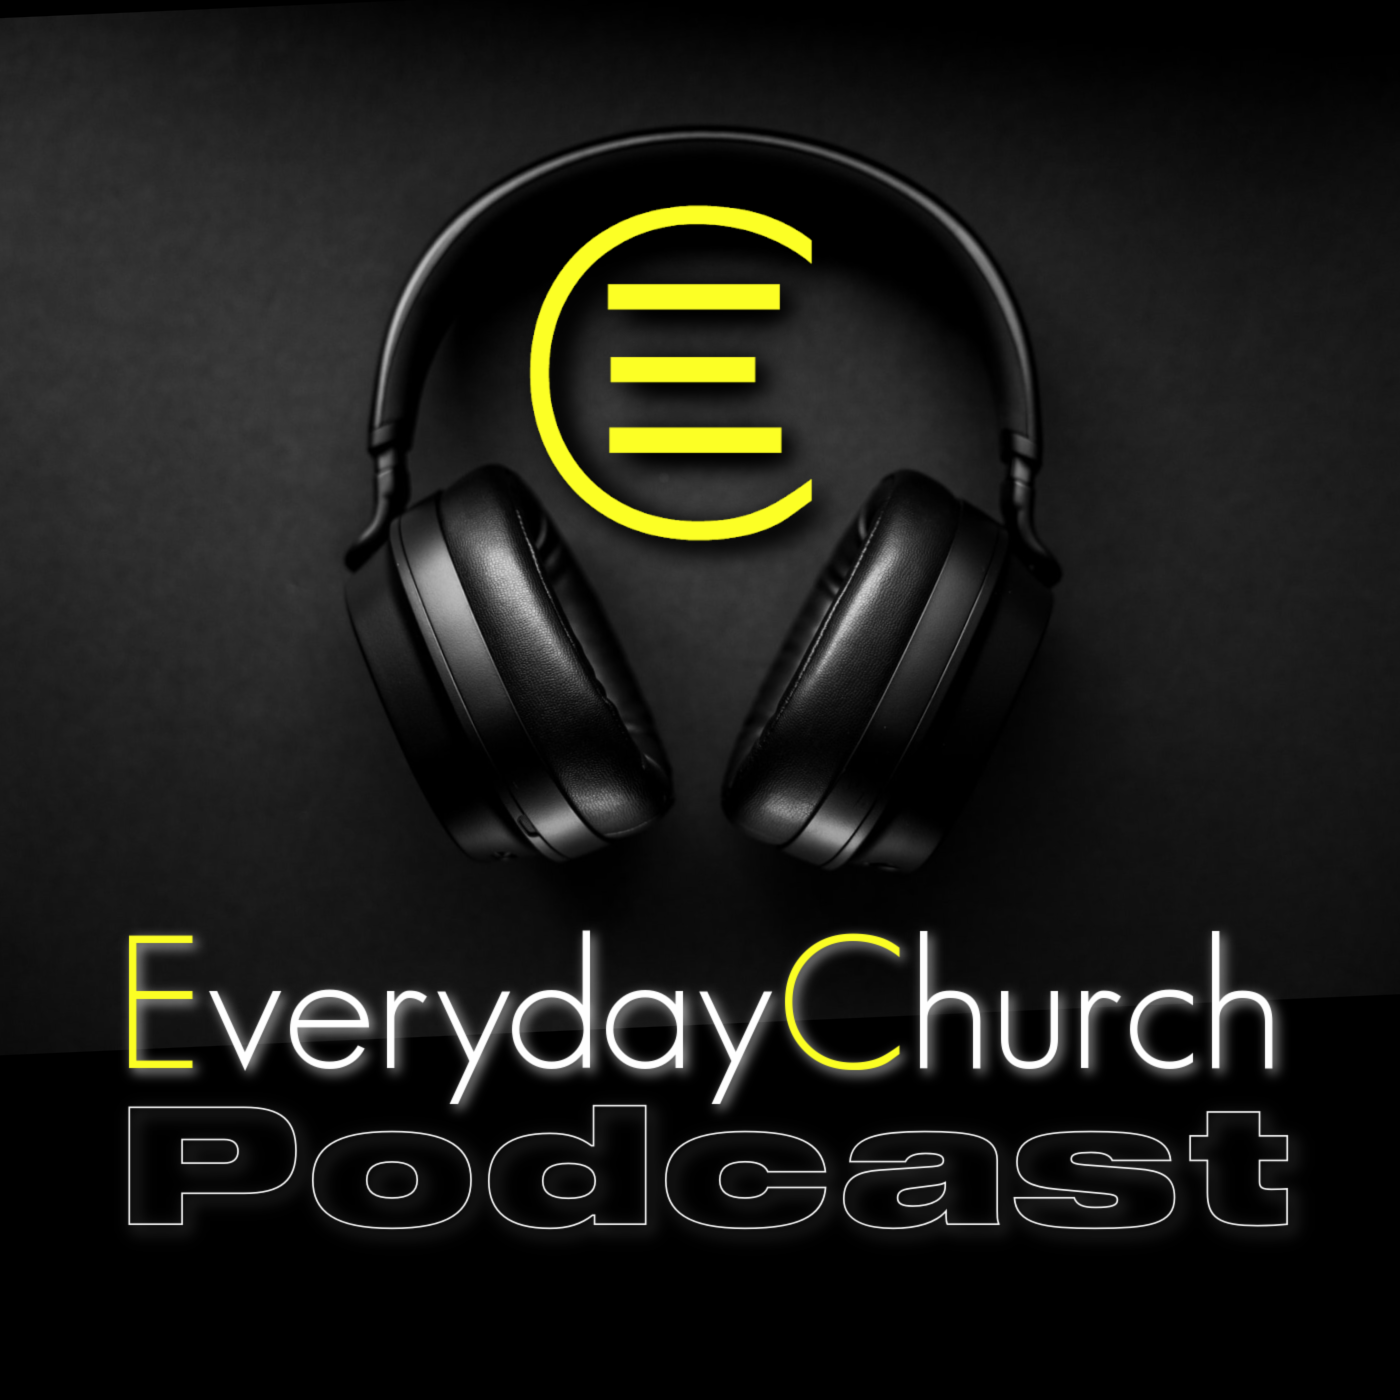 The Everyday Church Podcast